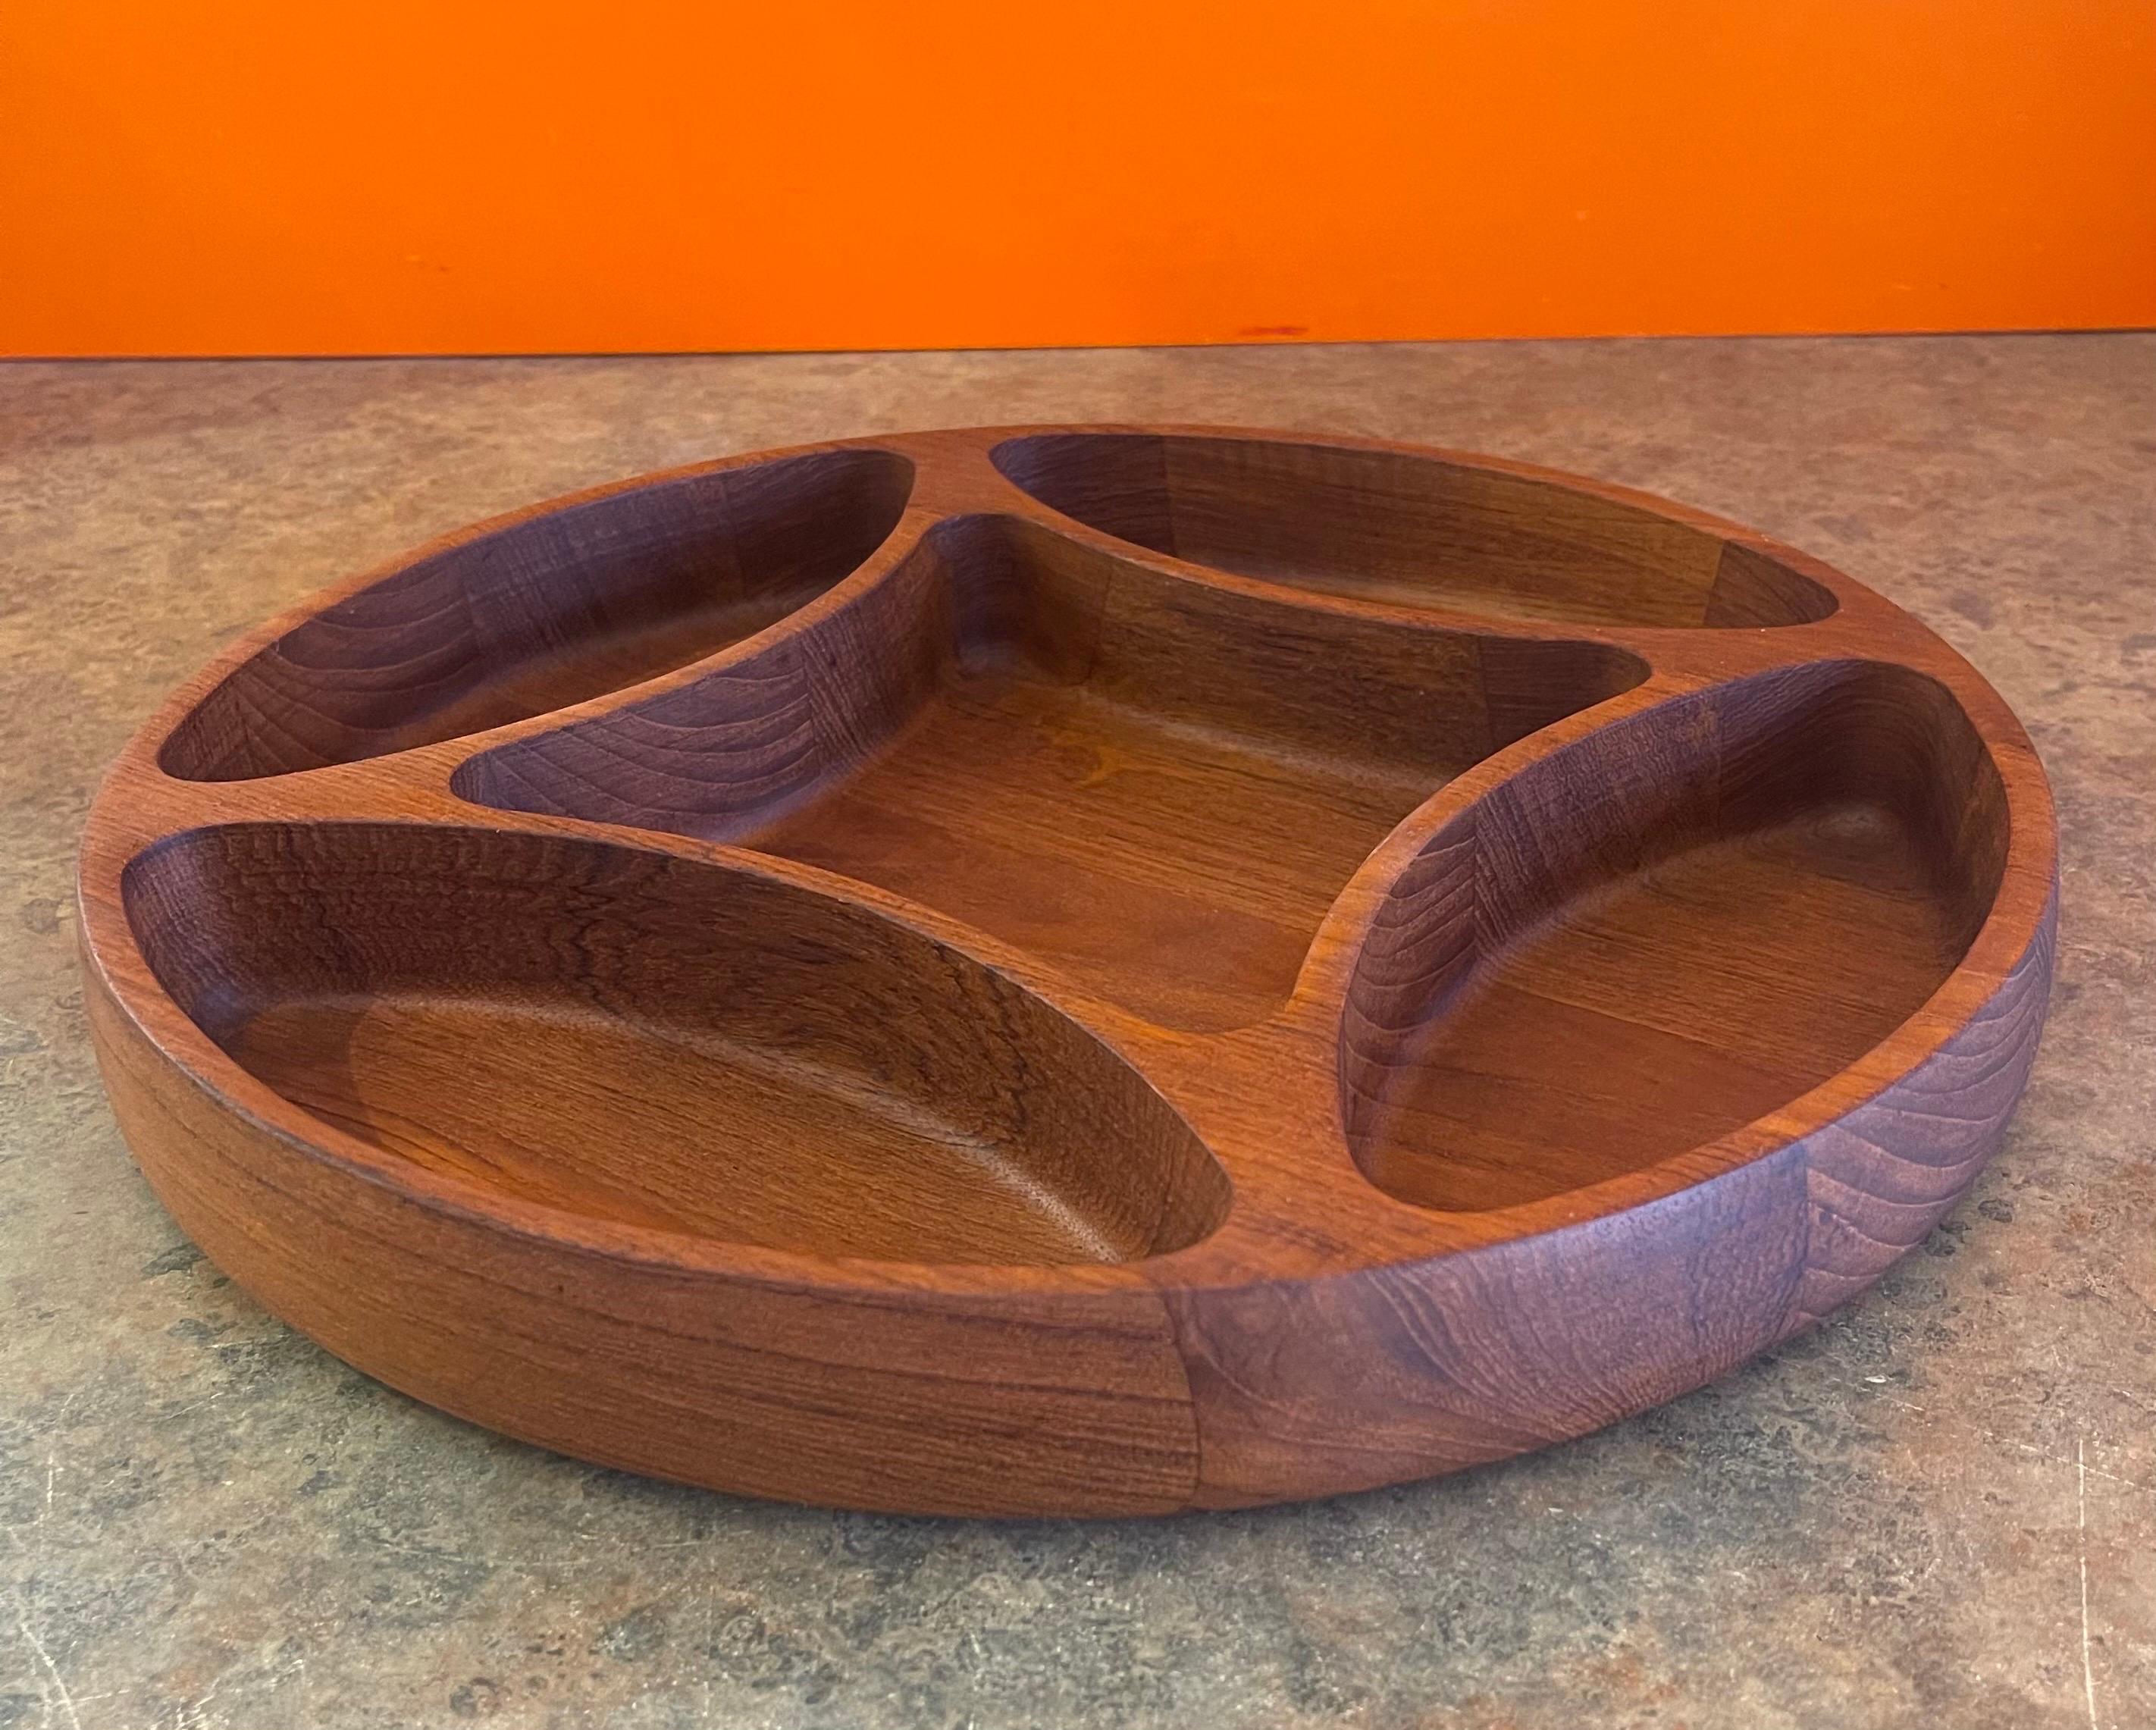 20th Century Large Divided Bowl / Tray in Teak by Jens Quistgaard for Dansk For Sale